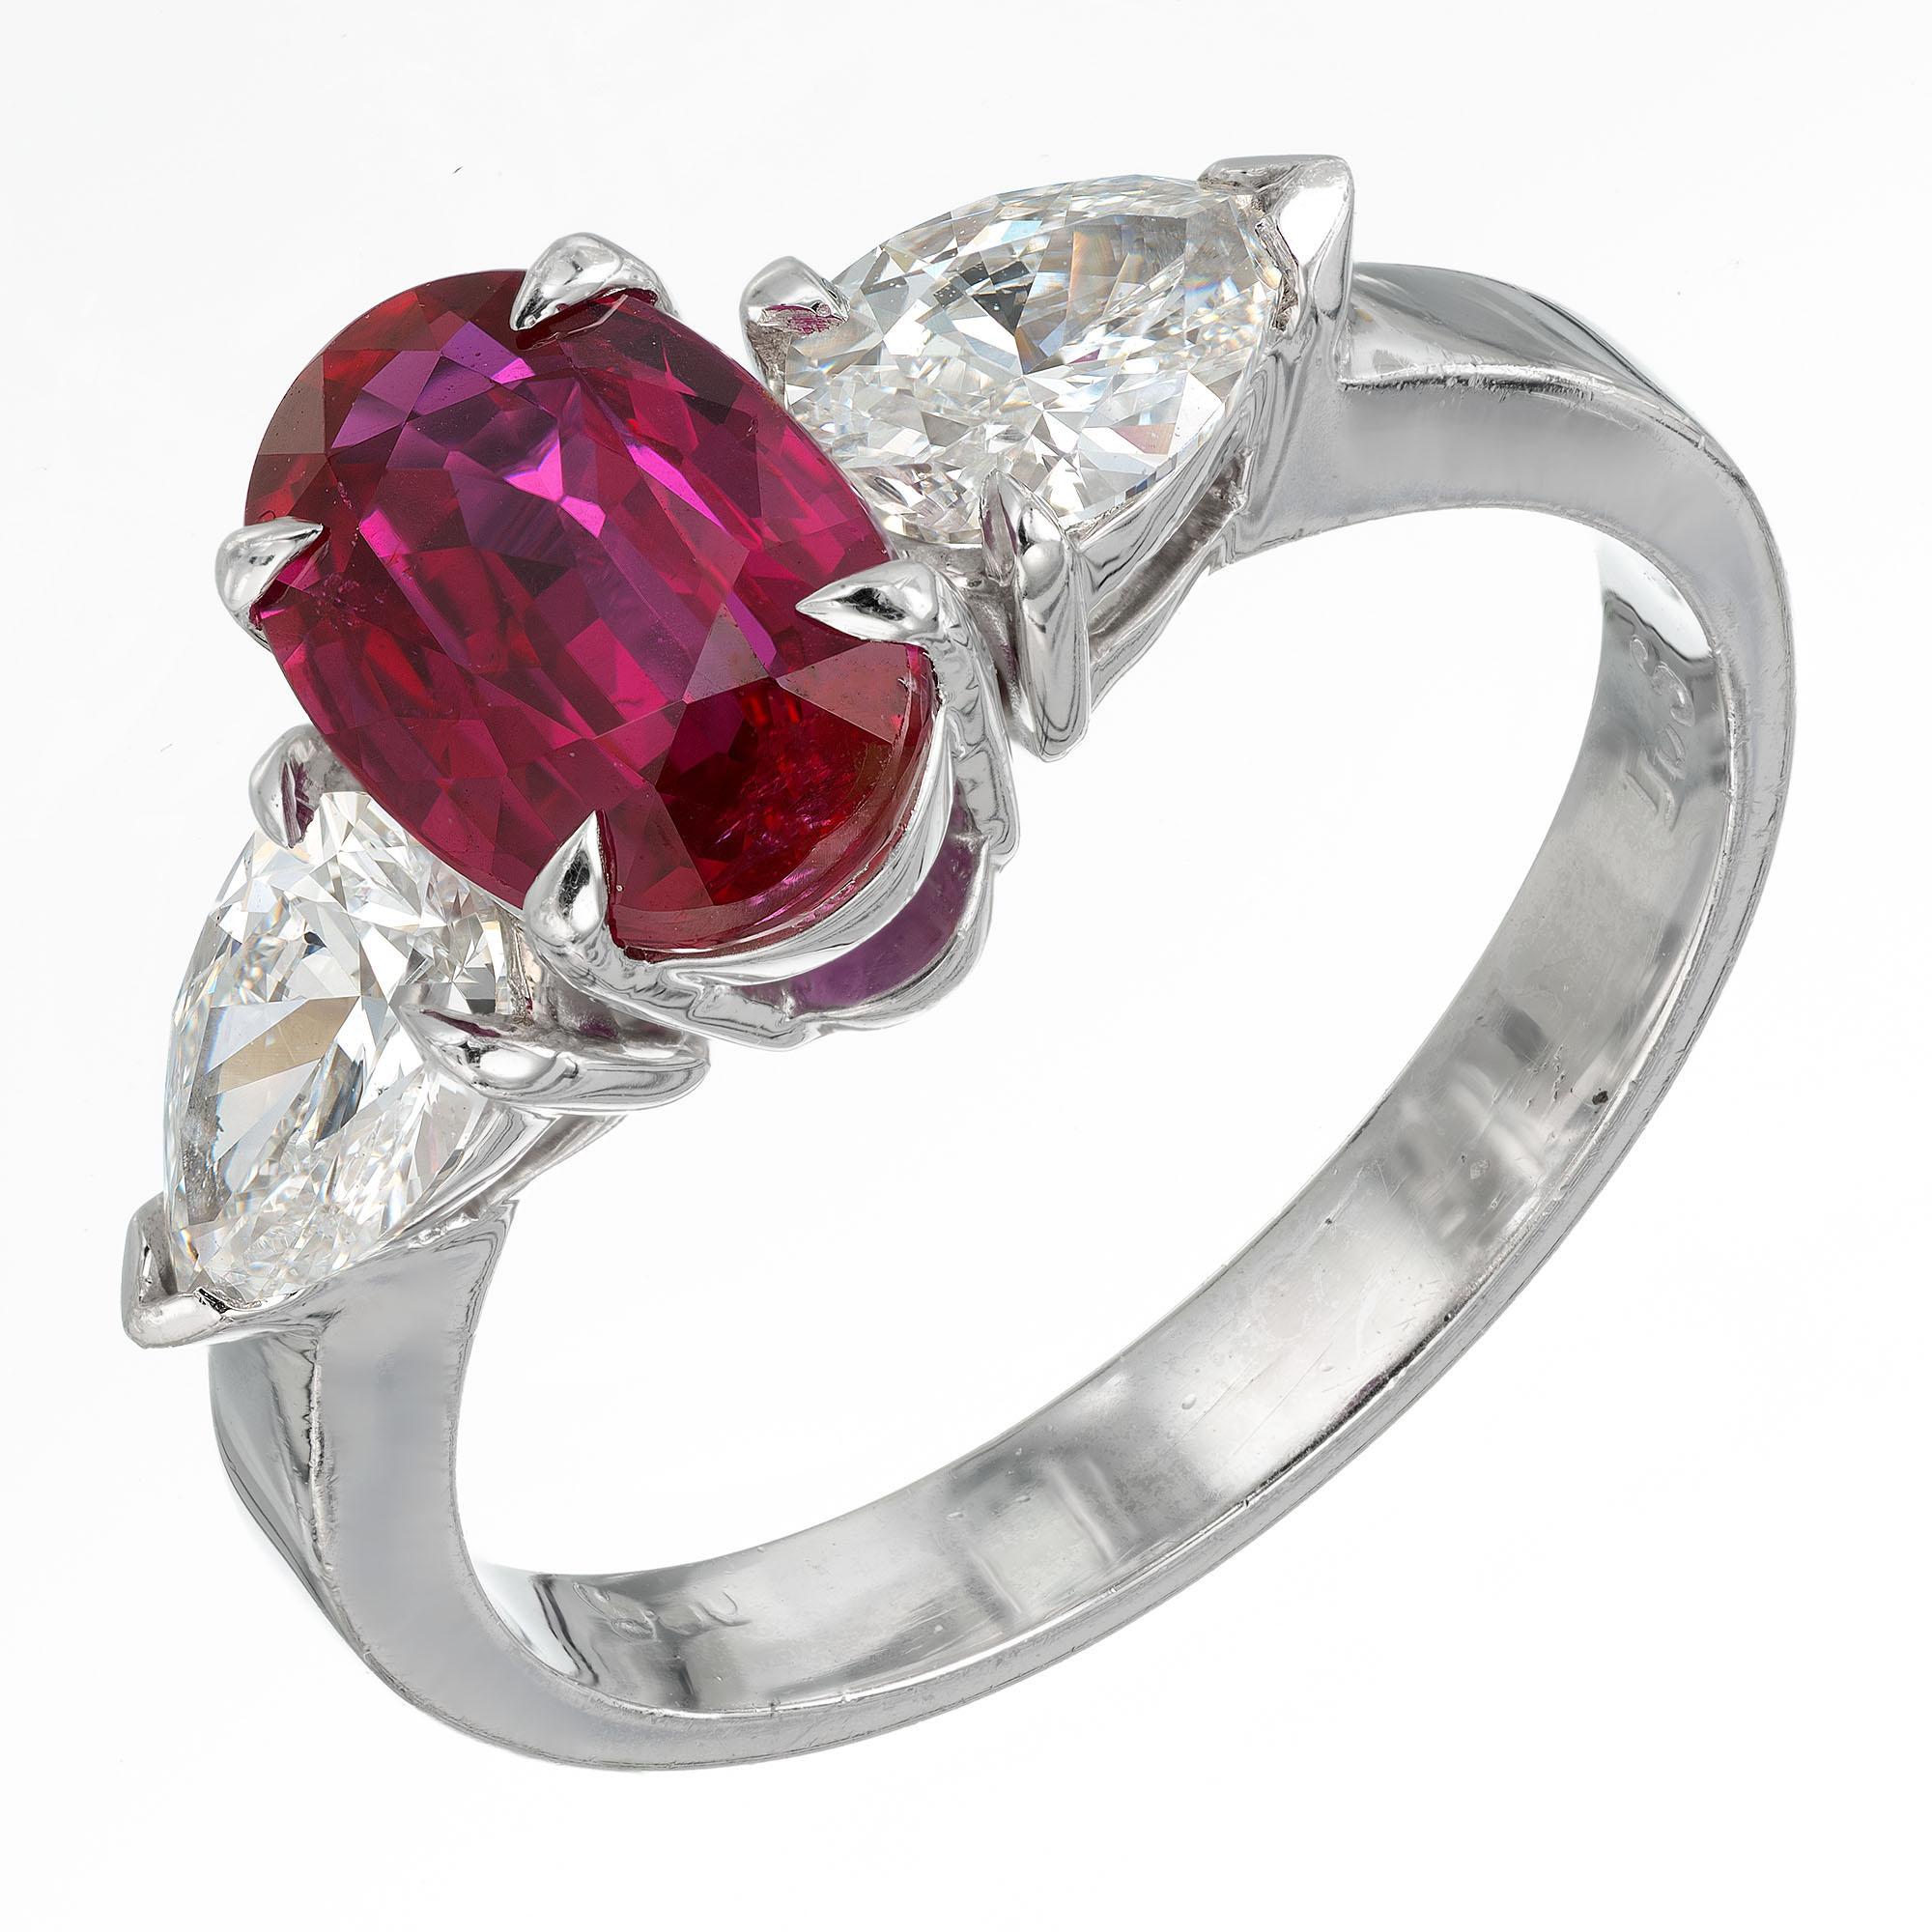 Three-stone oval ruby center stone with two pear shaped diamond side accents. The platinum setting is handmade from the Peter Suchy Workshop. GIA certified. 

1 oval natural rare purplish red Ruby, approx. total weight 2.02cts, SI1, 9.11 x 6.07 x